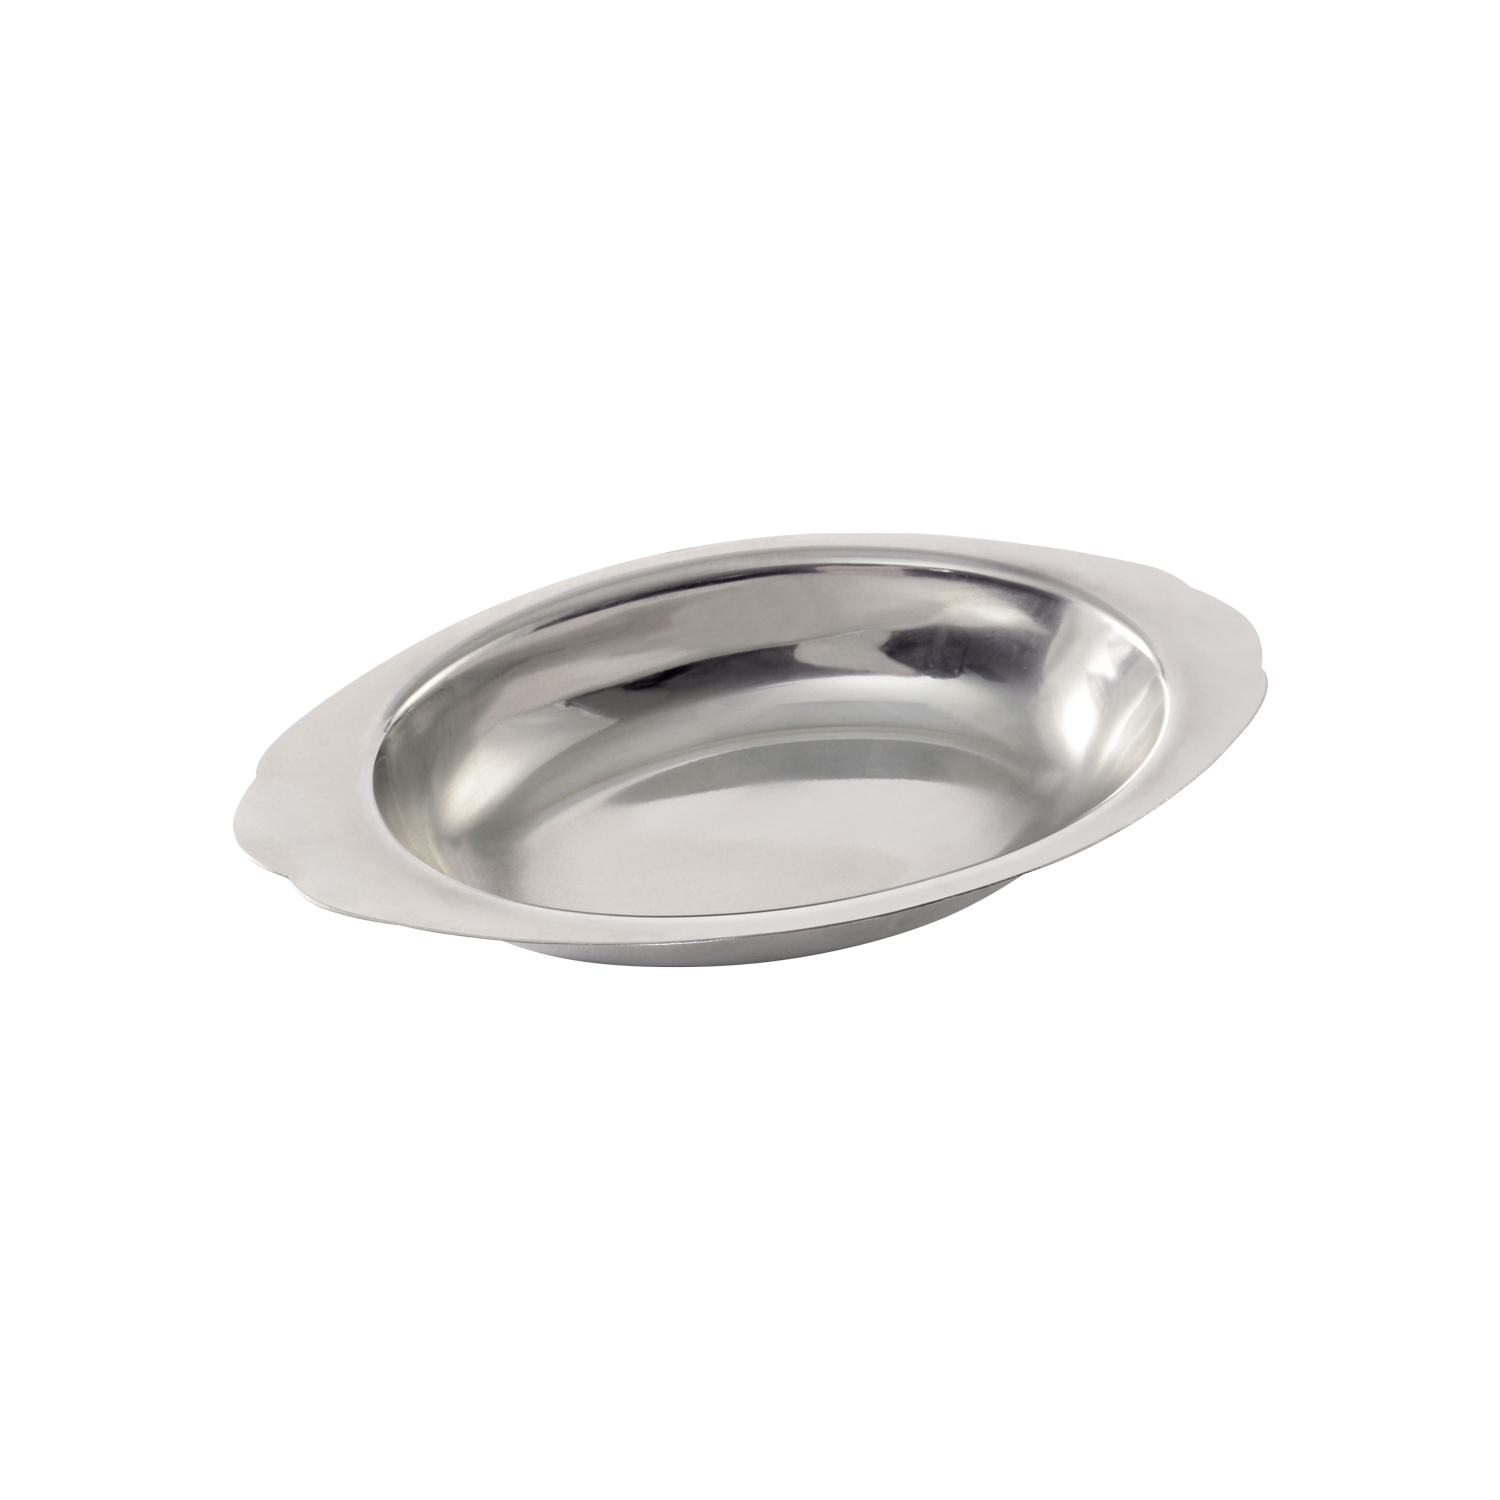 CAC China AUDS-15 Stainless Steel Oval Au Gratin Dish 15 oz.